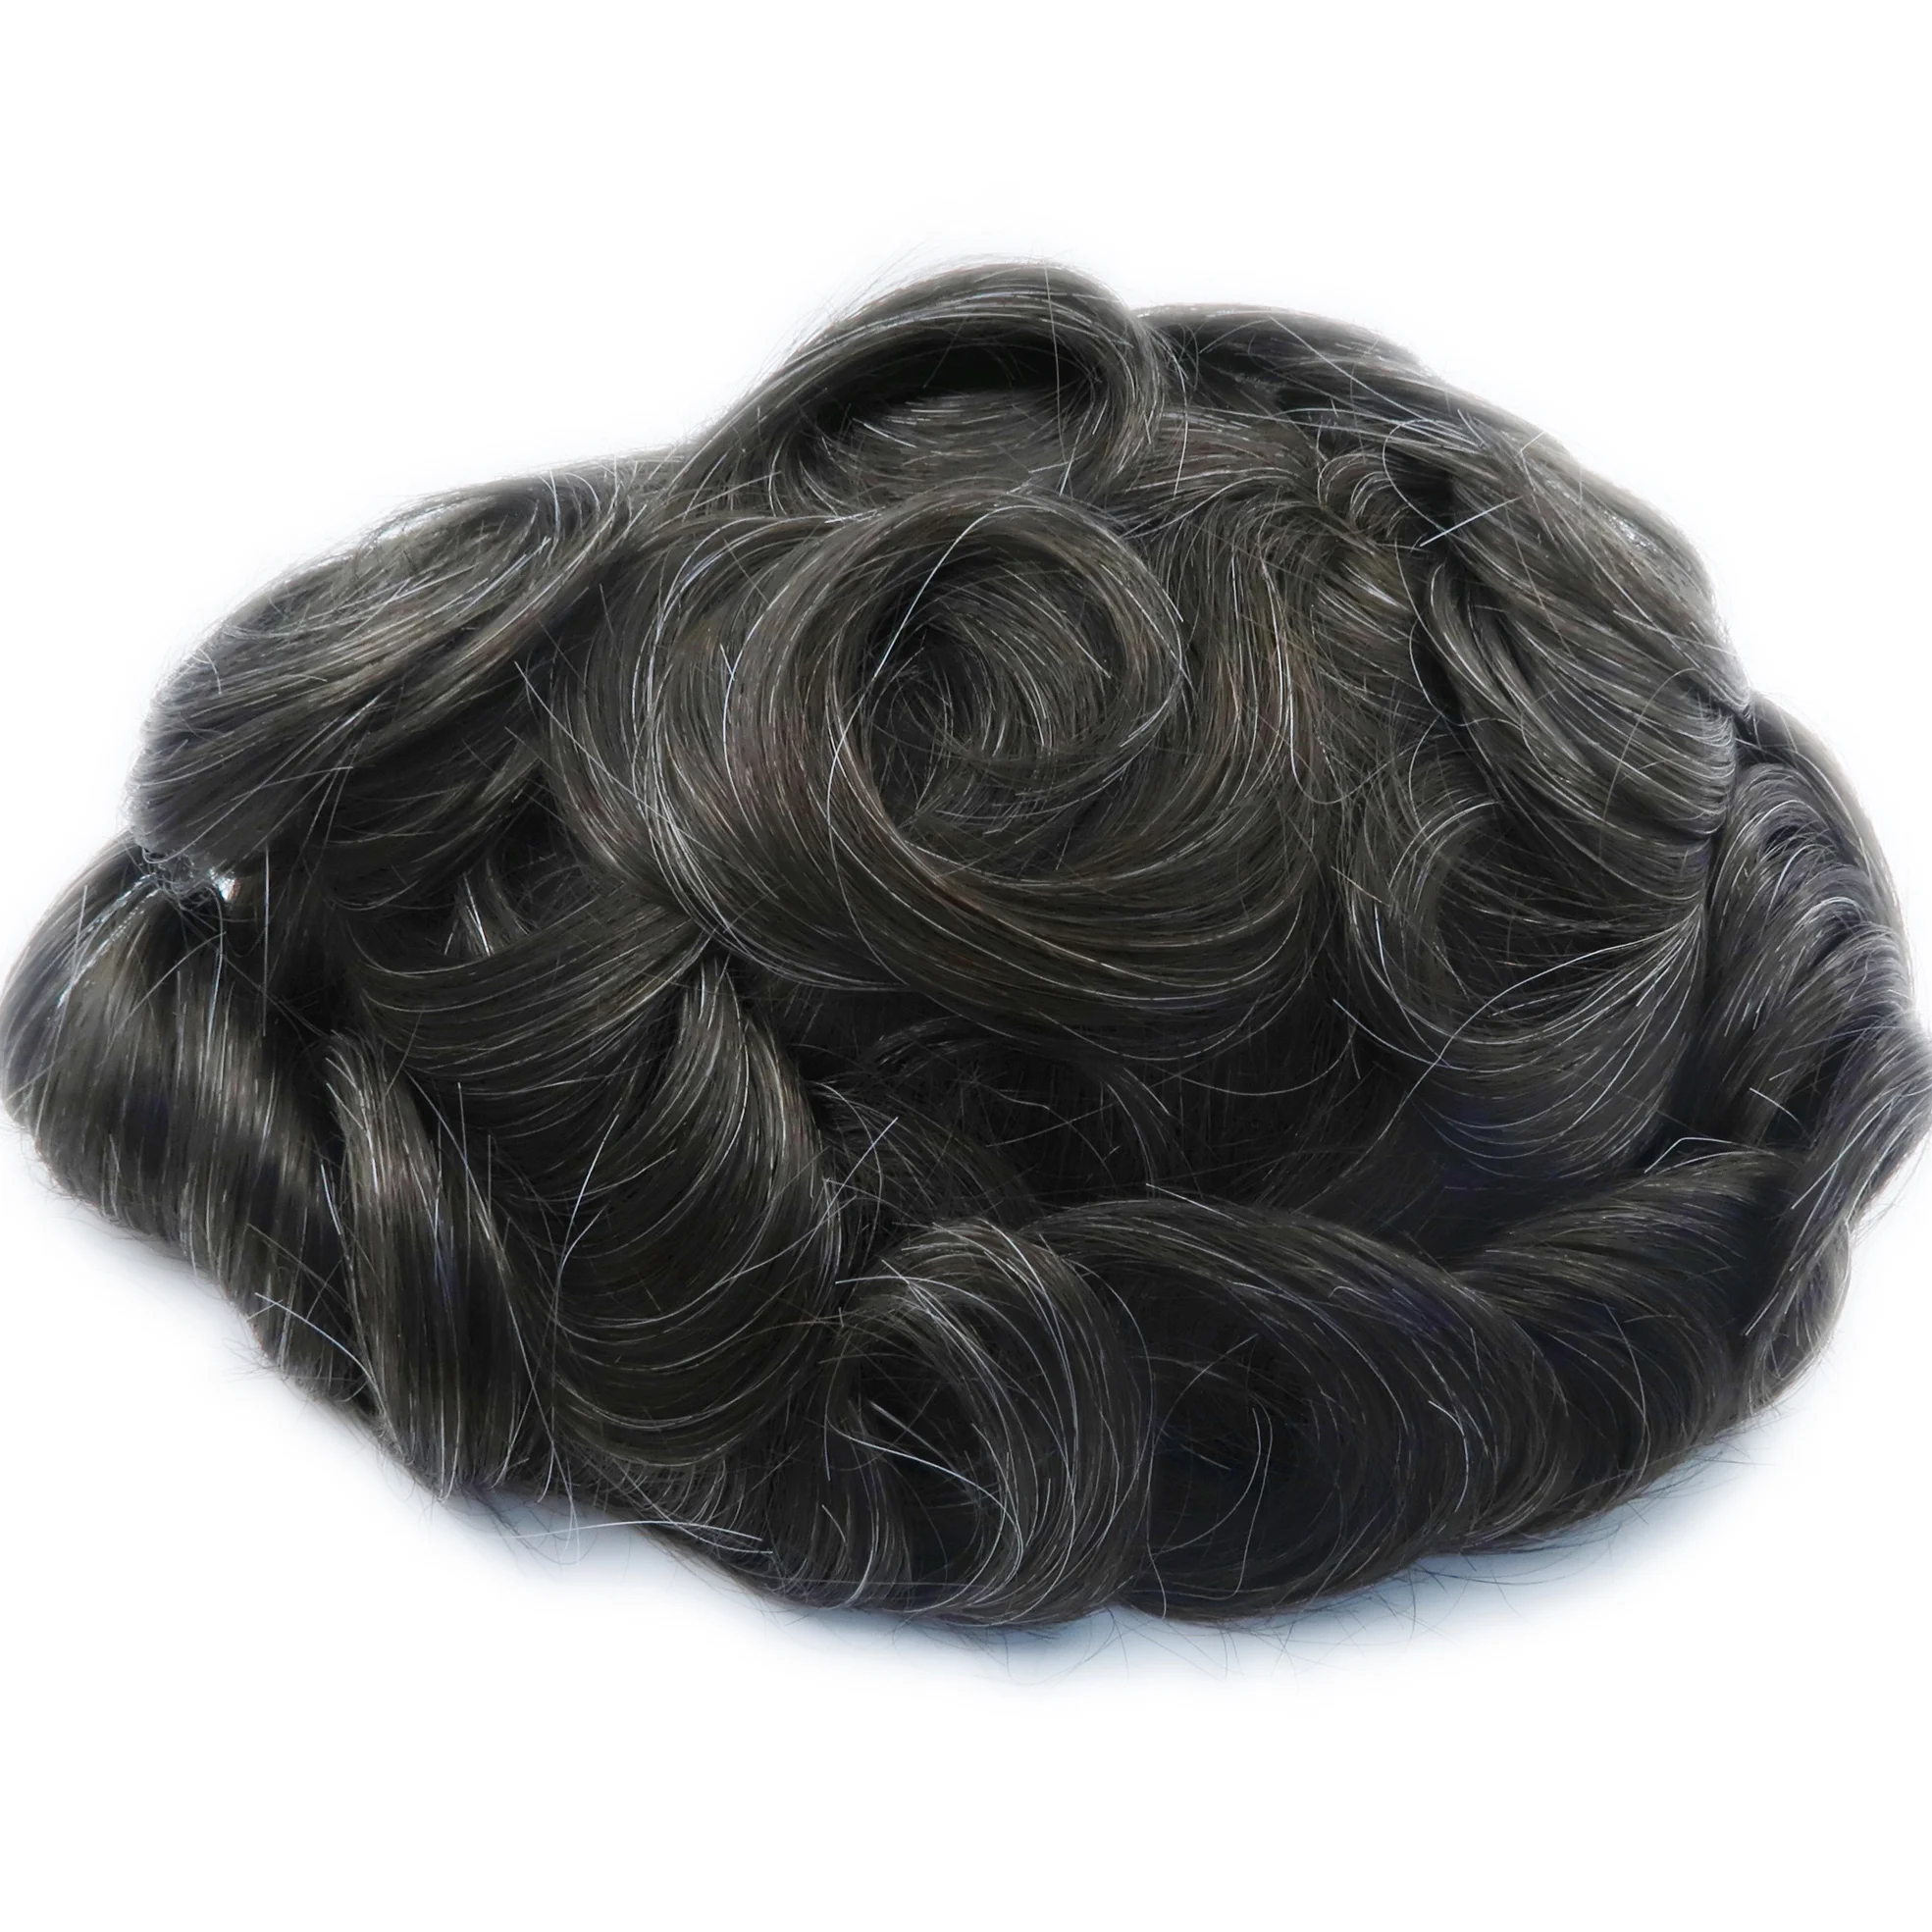 

Zhongfa natural breathable hair system Clear PU,12-14# free style ready to ship toupee, Available in all natural colors with different grey percentage